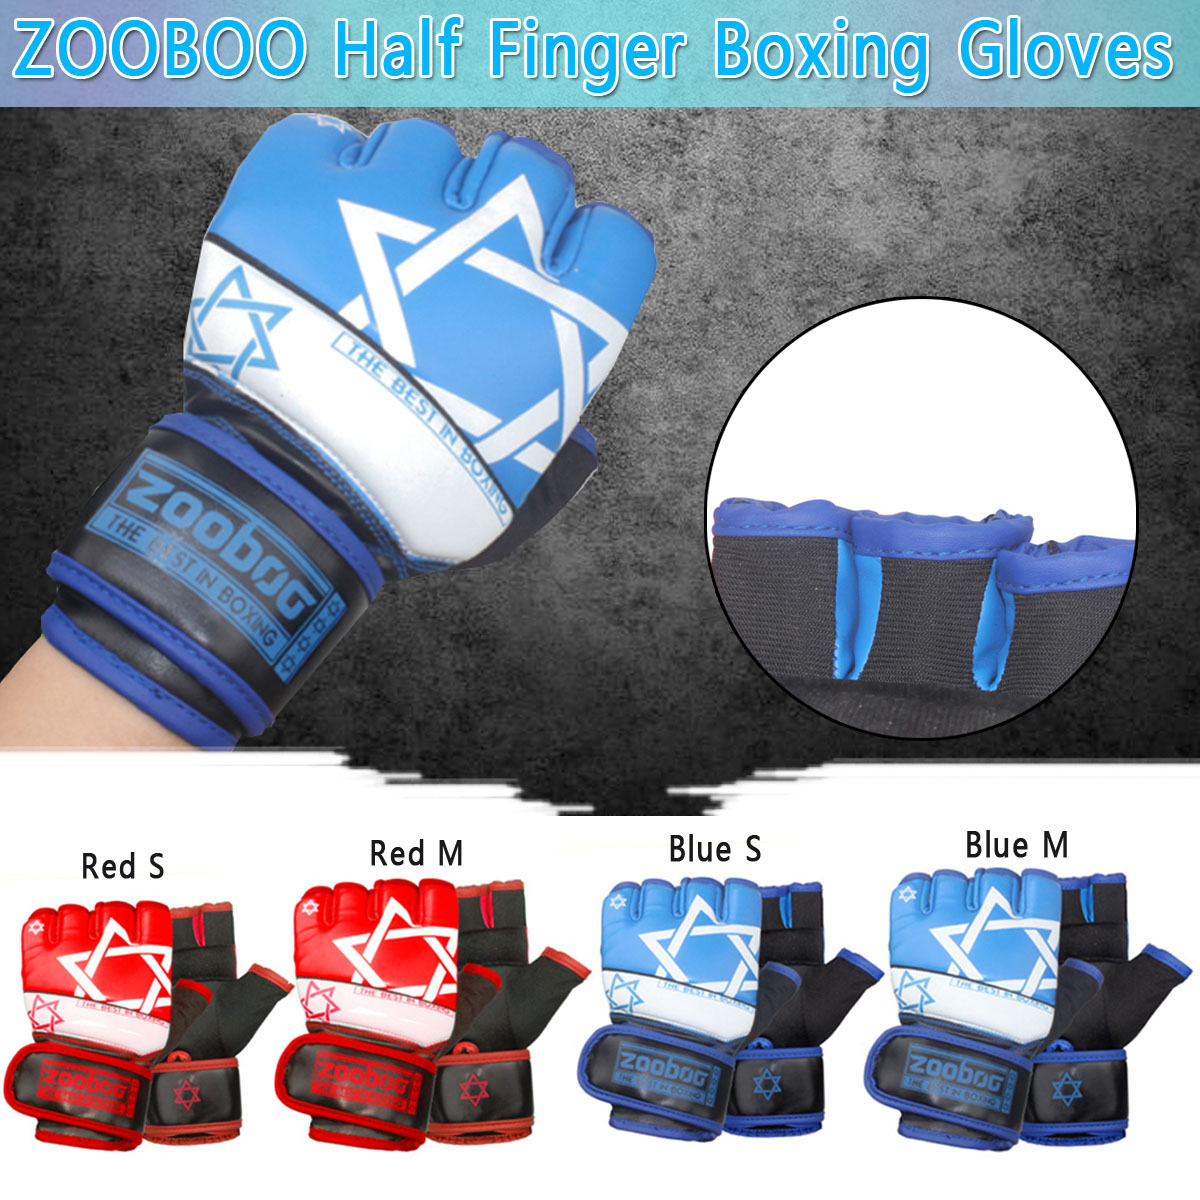 ZOOBOO-Boxing-Gloves-Training-Gloves-Sparring-Mitts-Slimming--Exercising-Boxing-Gloves-1637308-1